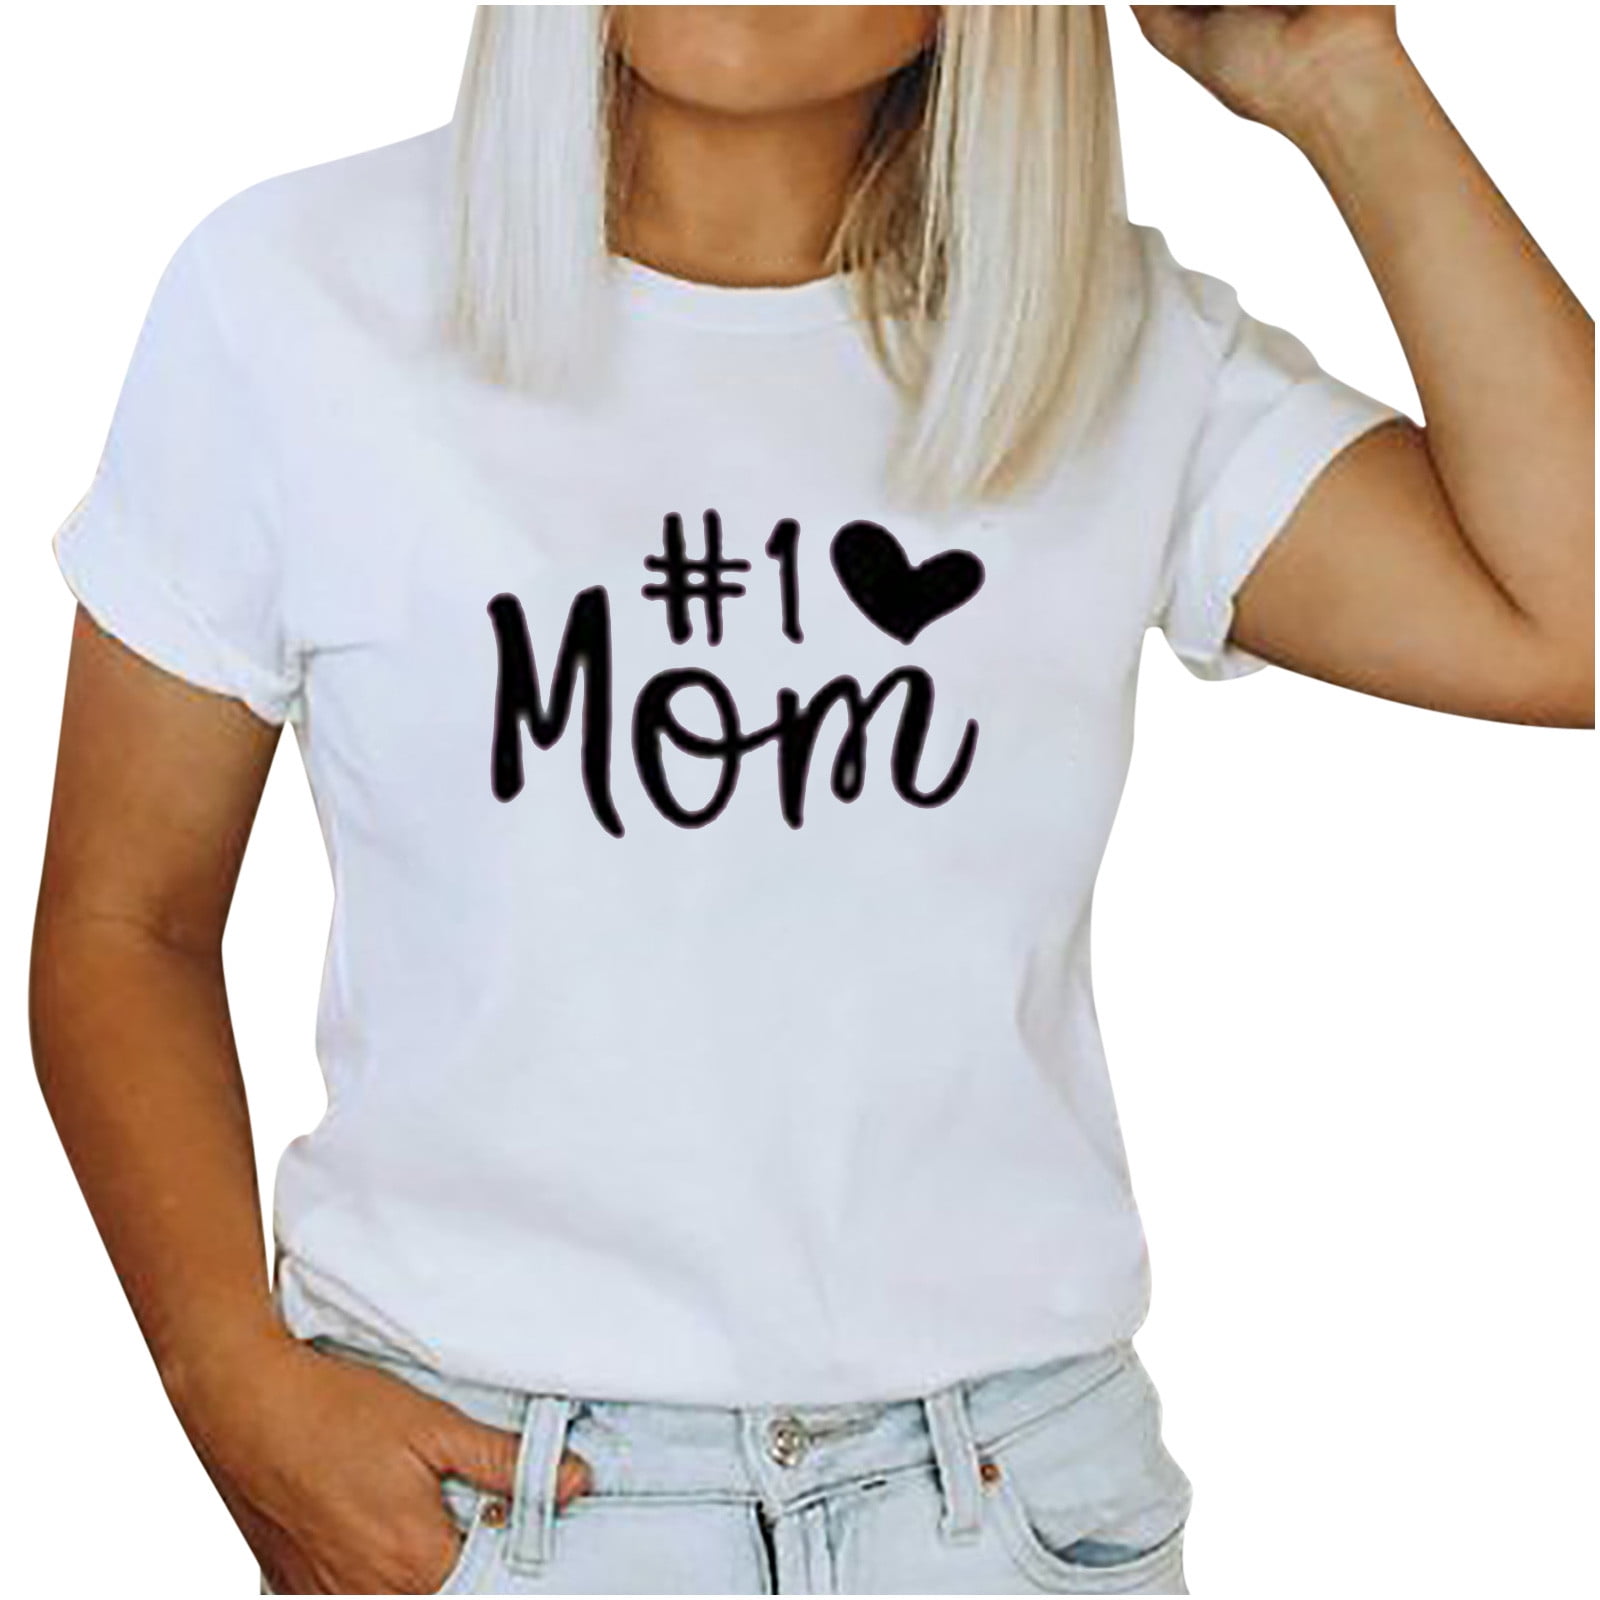 2023 Love Heart Shirt Plus Size Pullover Women Long Sleeve Tops Crewneck  Sweatshirts Mother's Day 